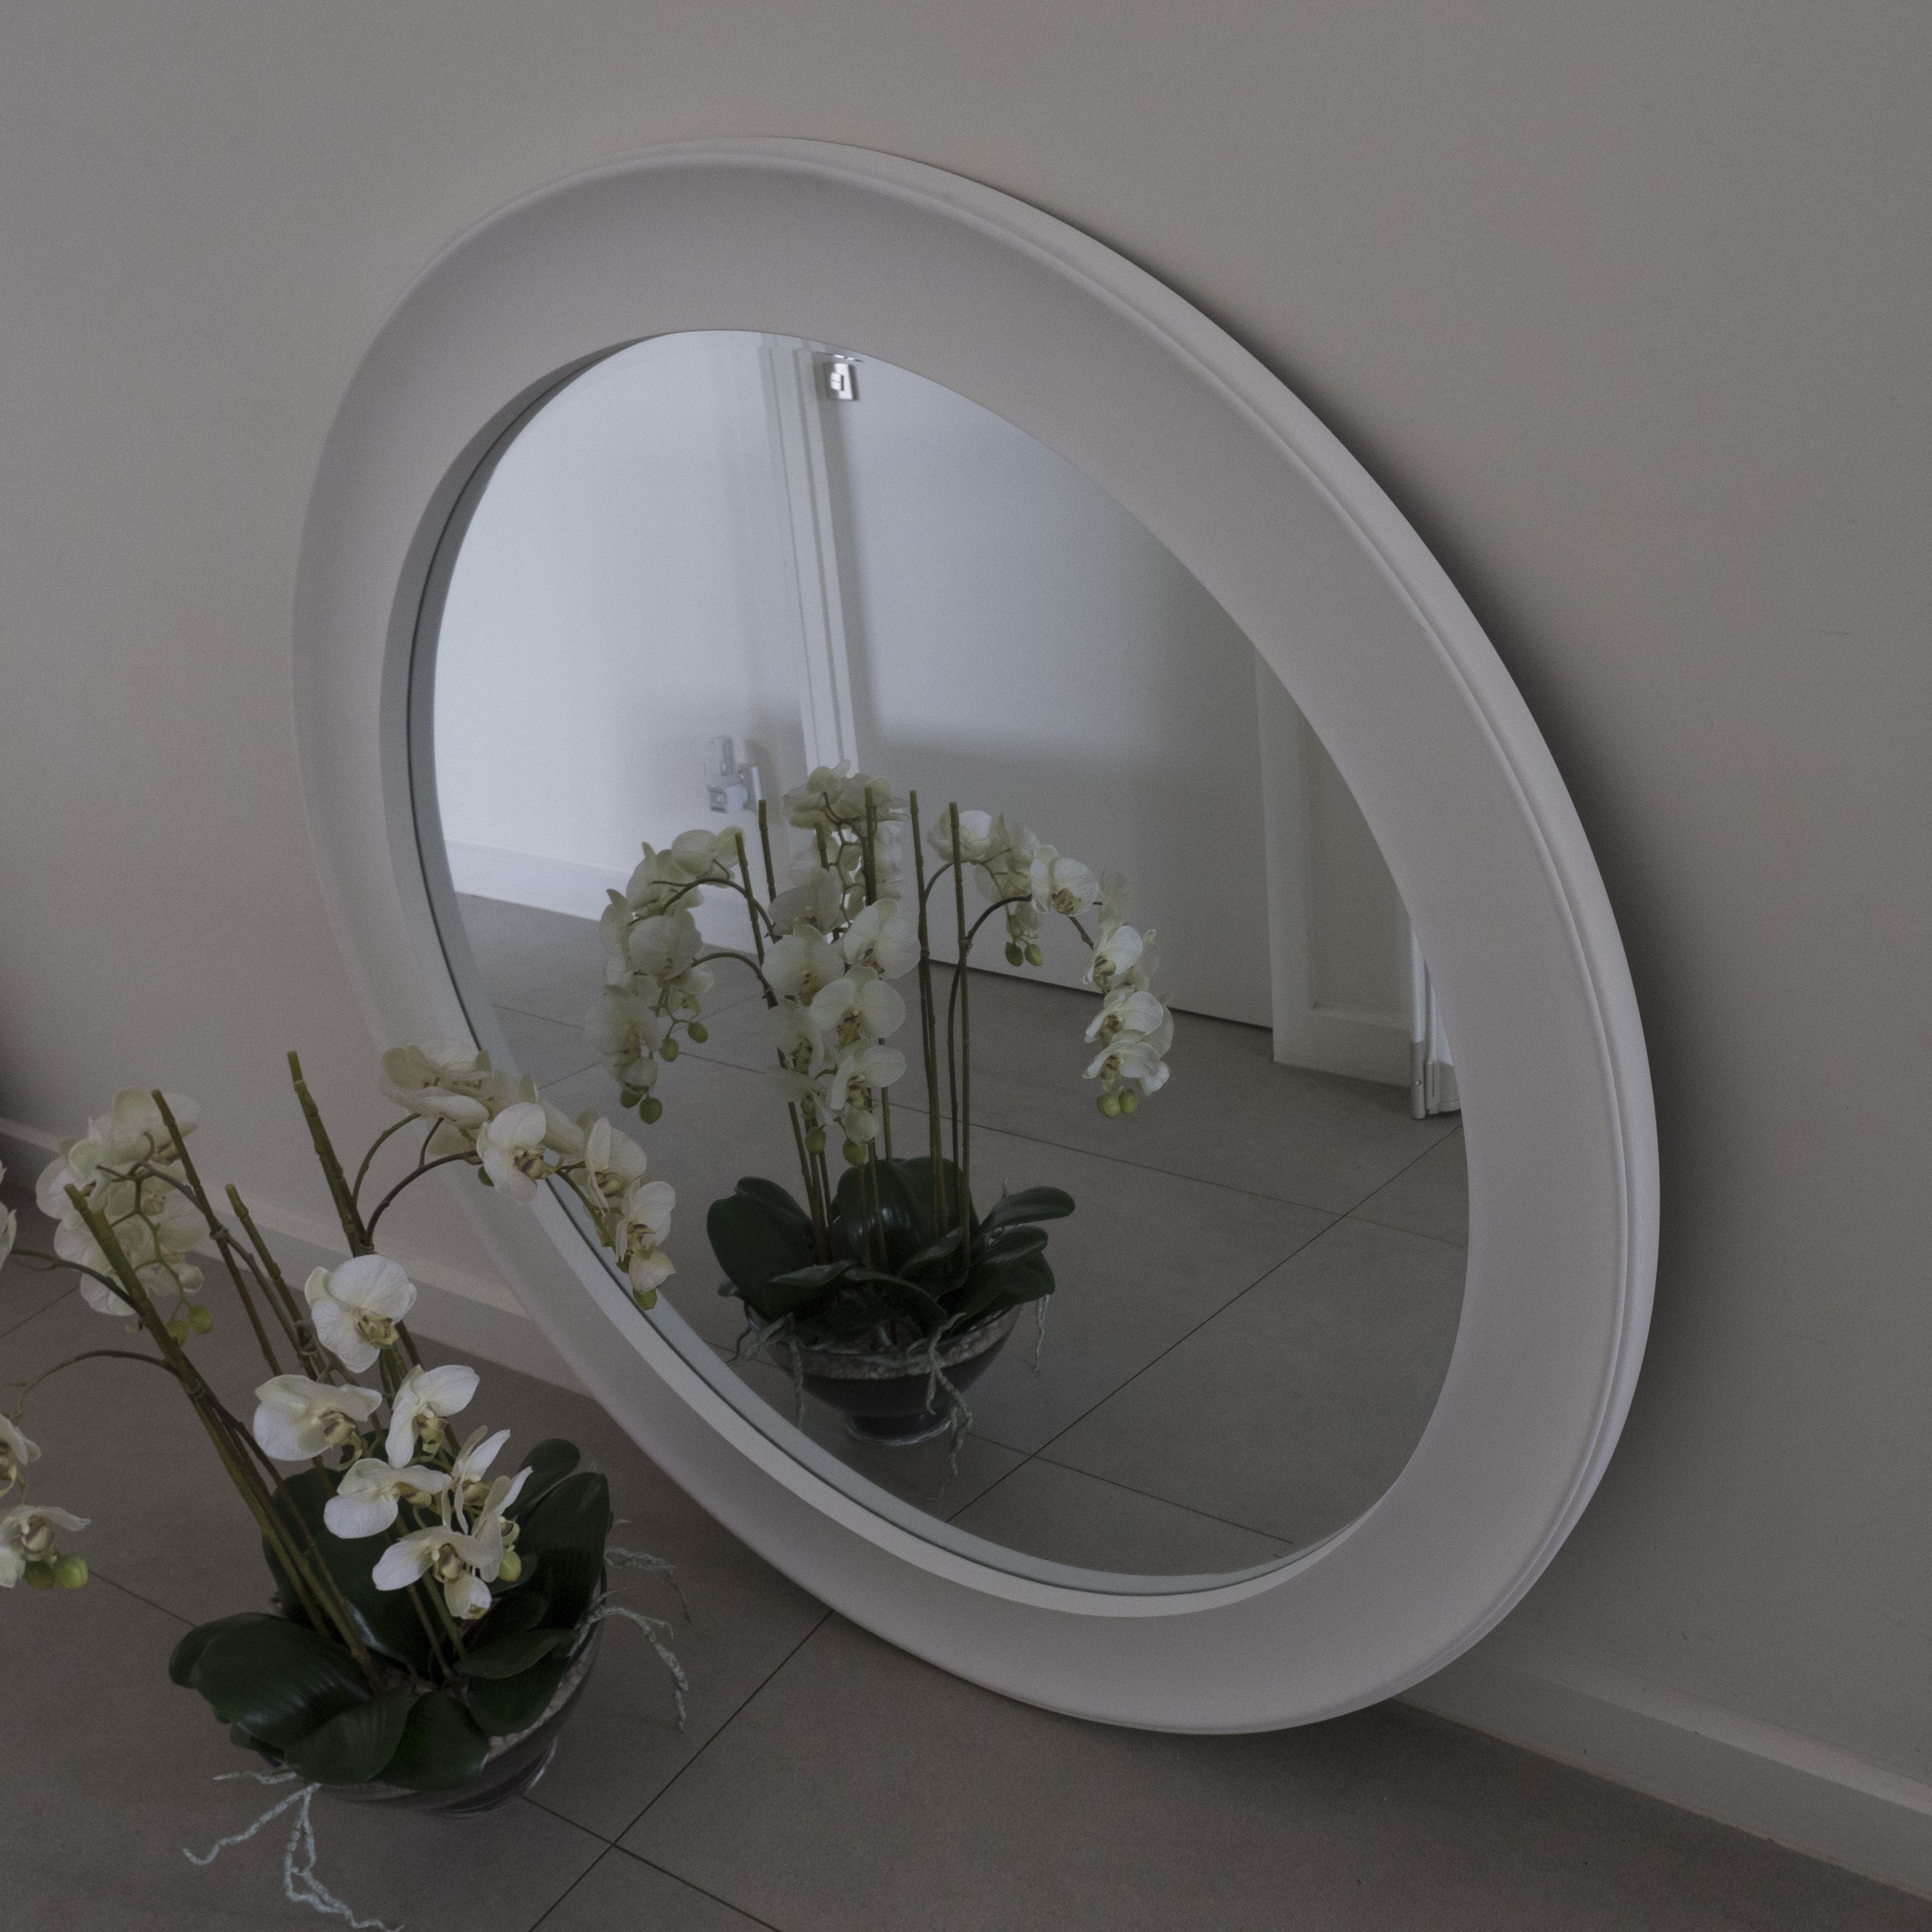 2020 Large Round Wall Mirrors Intended For Large Round White Mirror 1.2 Metres. It's Huge! On Sale $ (View 14 of 20)